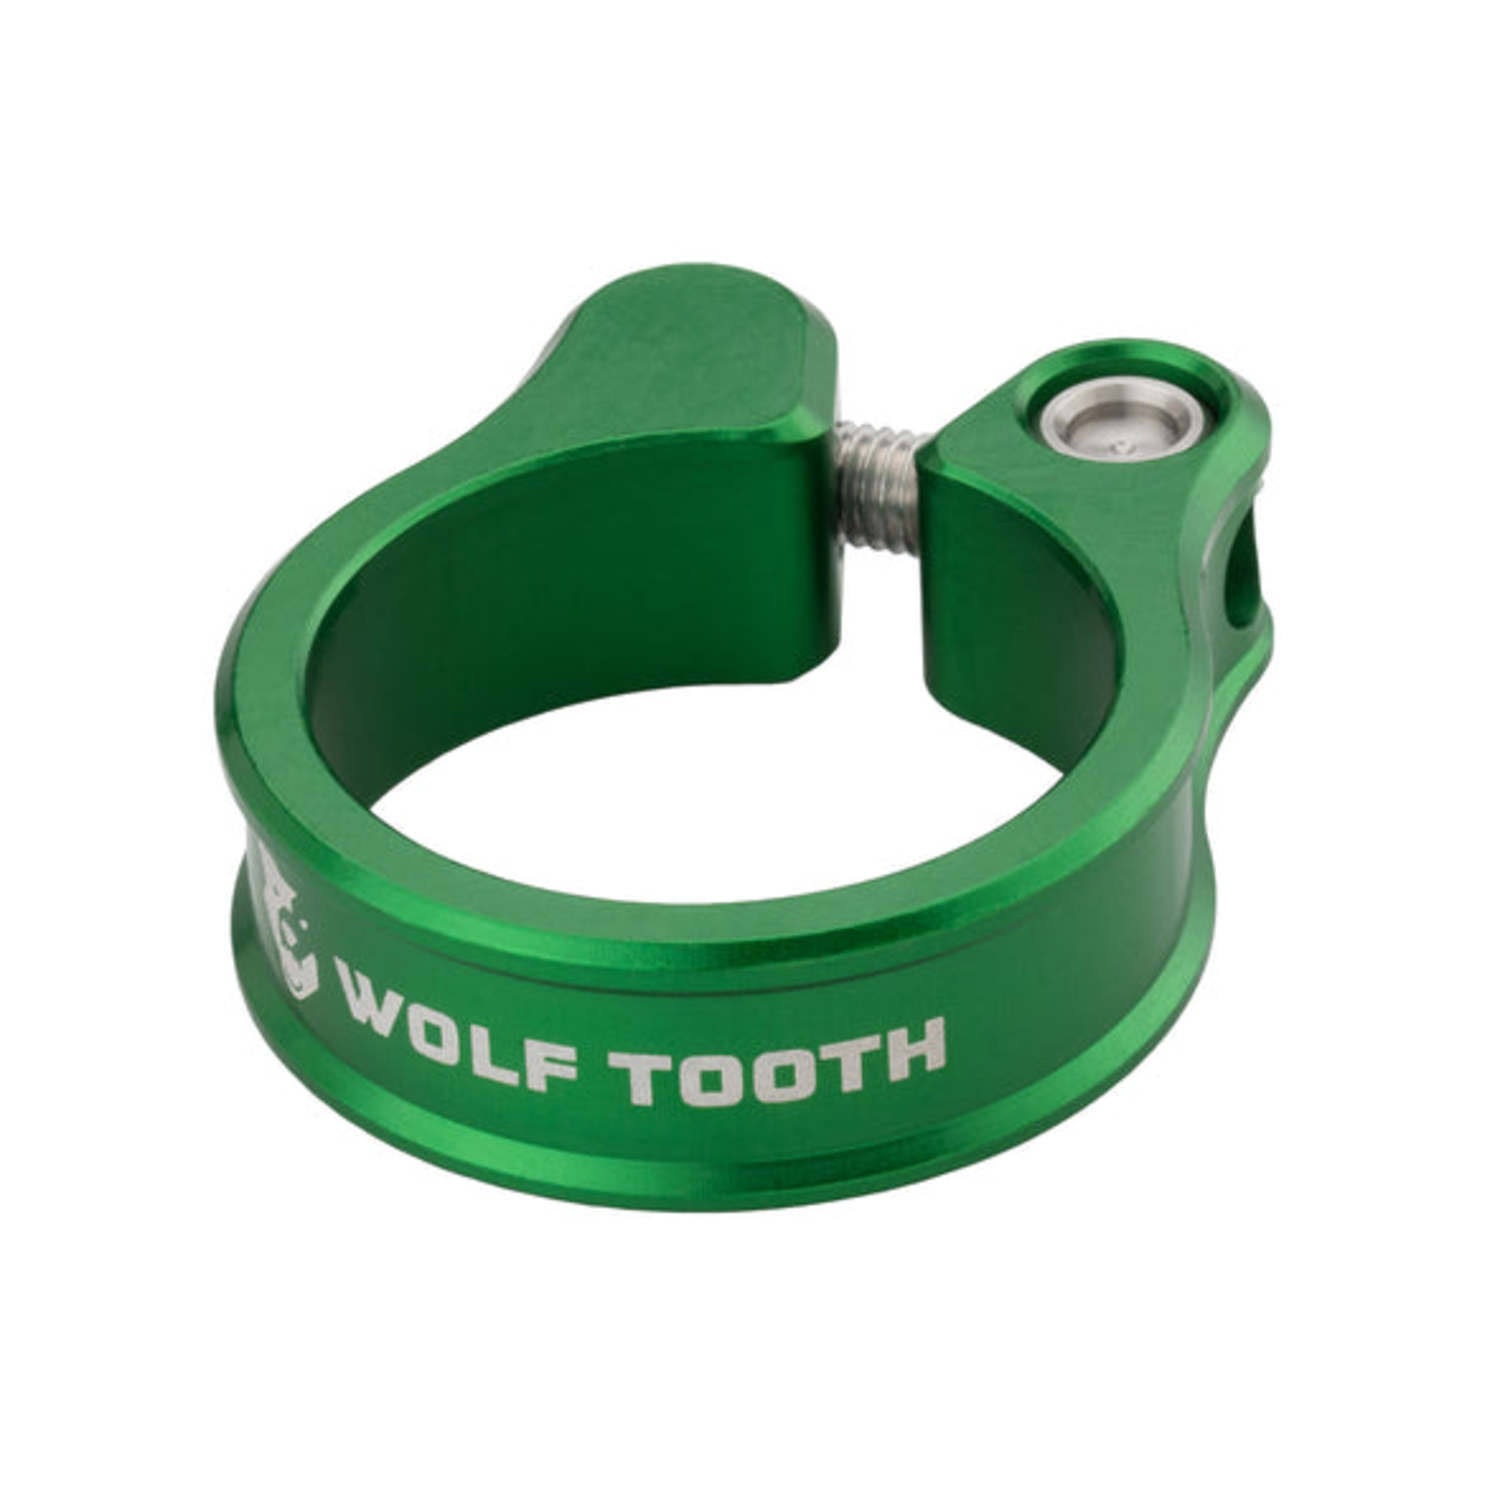 Wolf Tooth Components Seatpost Clamp 29.8mm Green